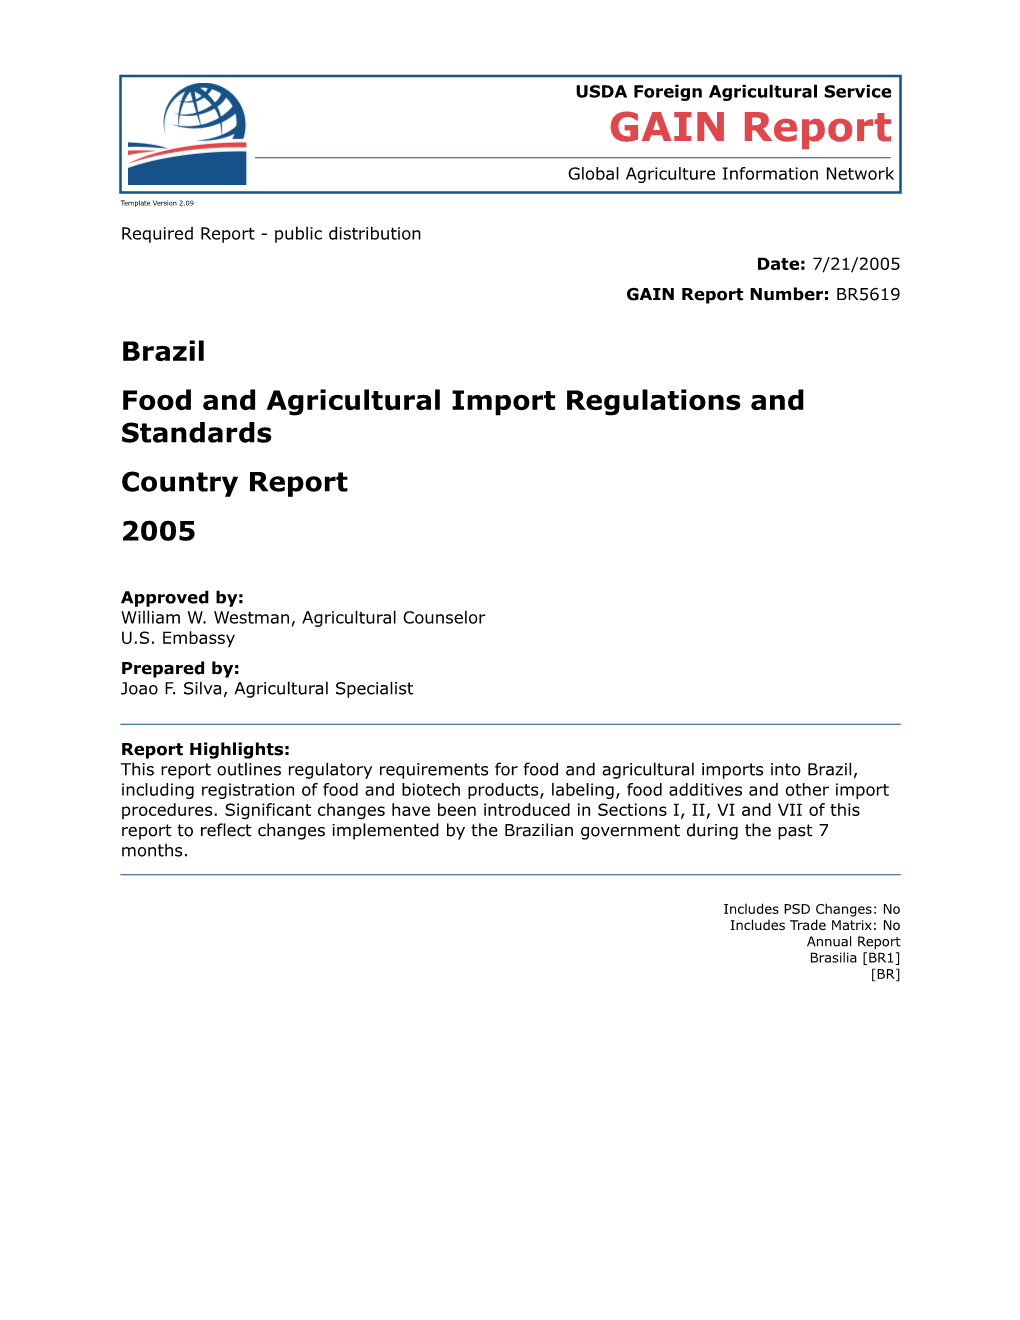 Food and Agricultural Import Regulations and Standards s16